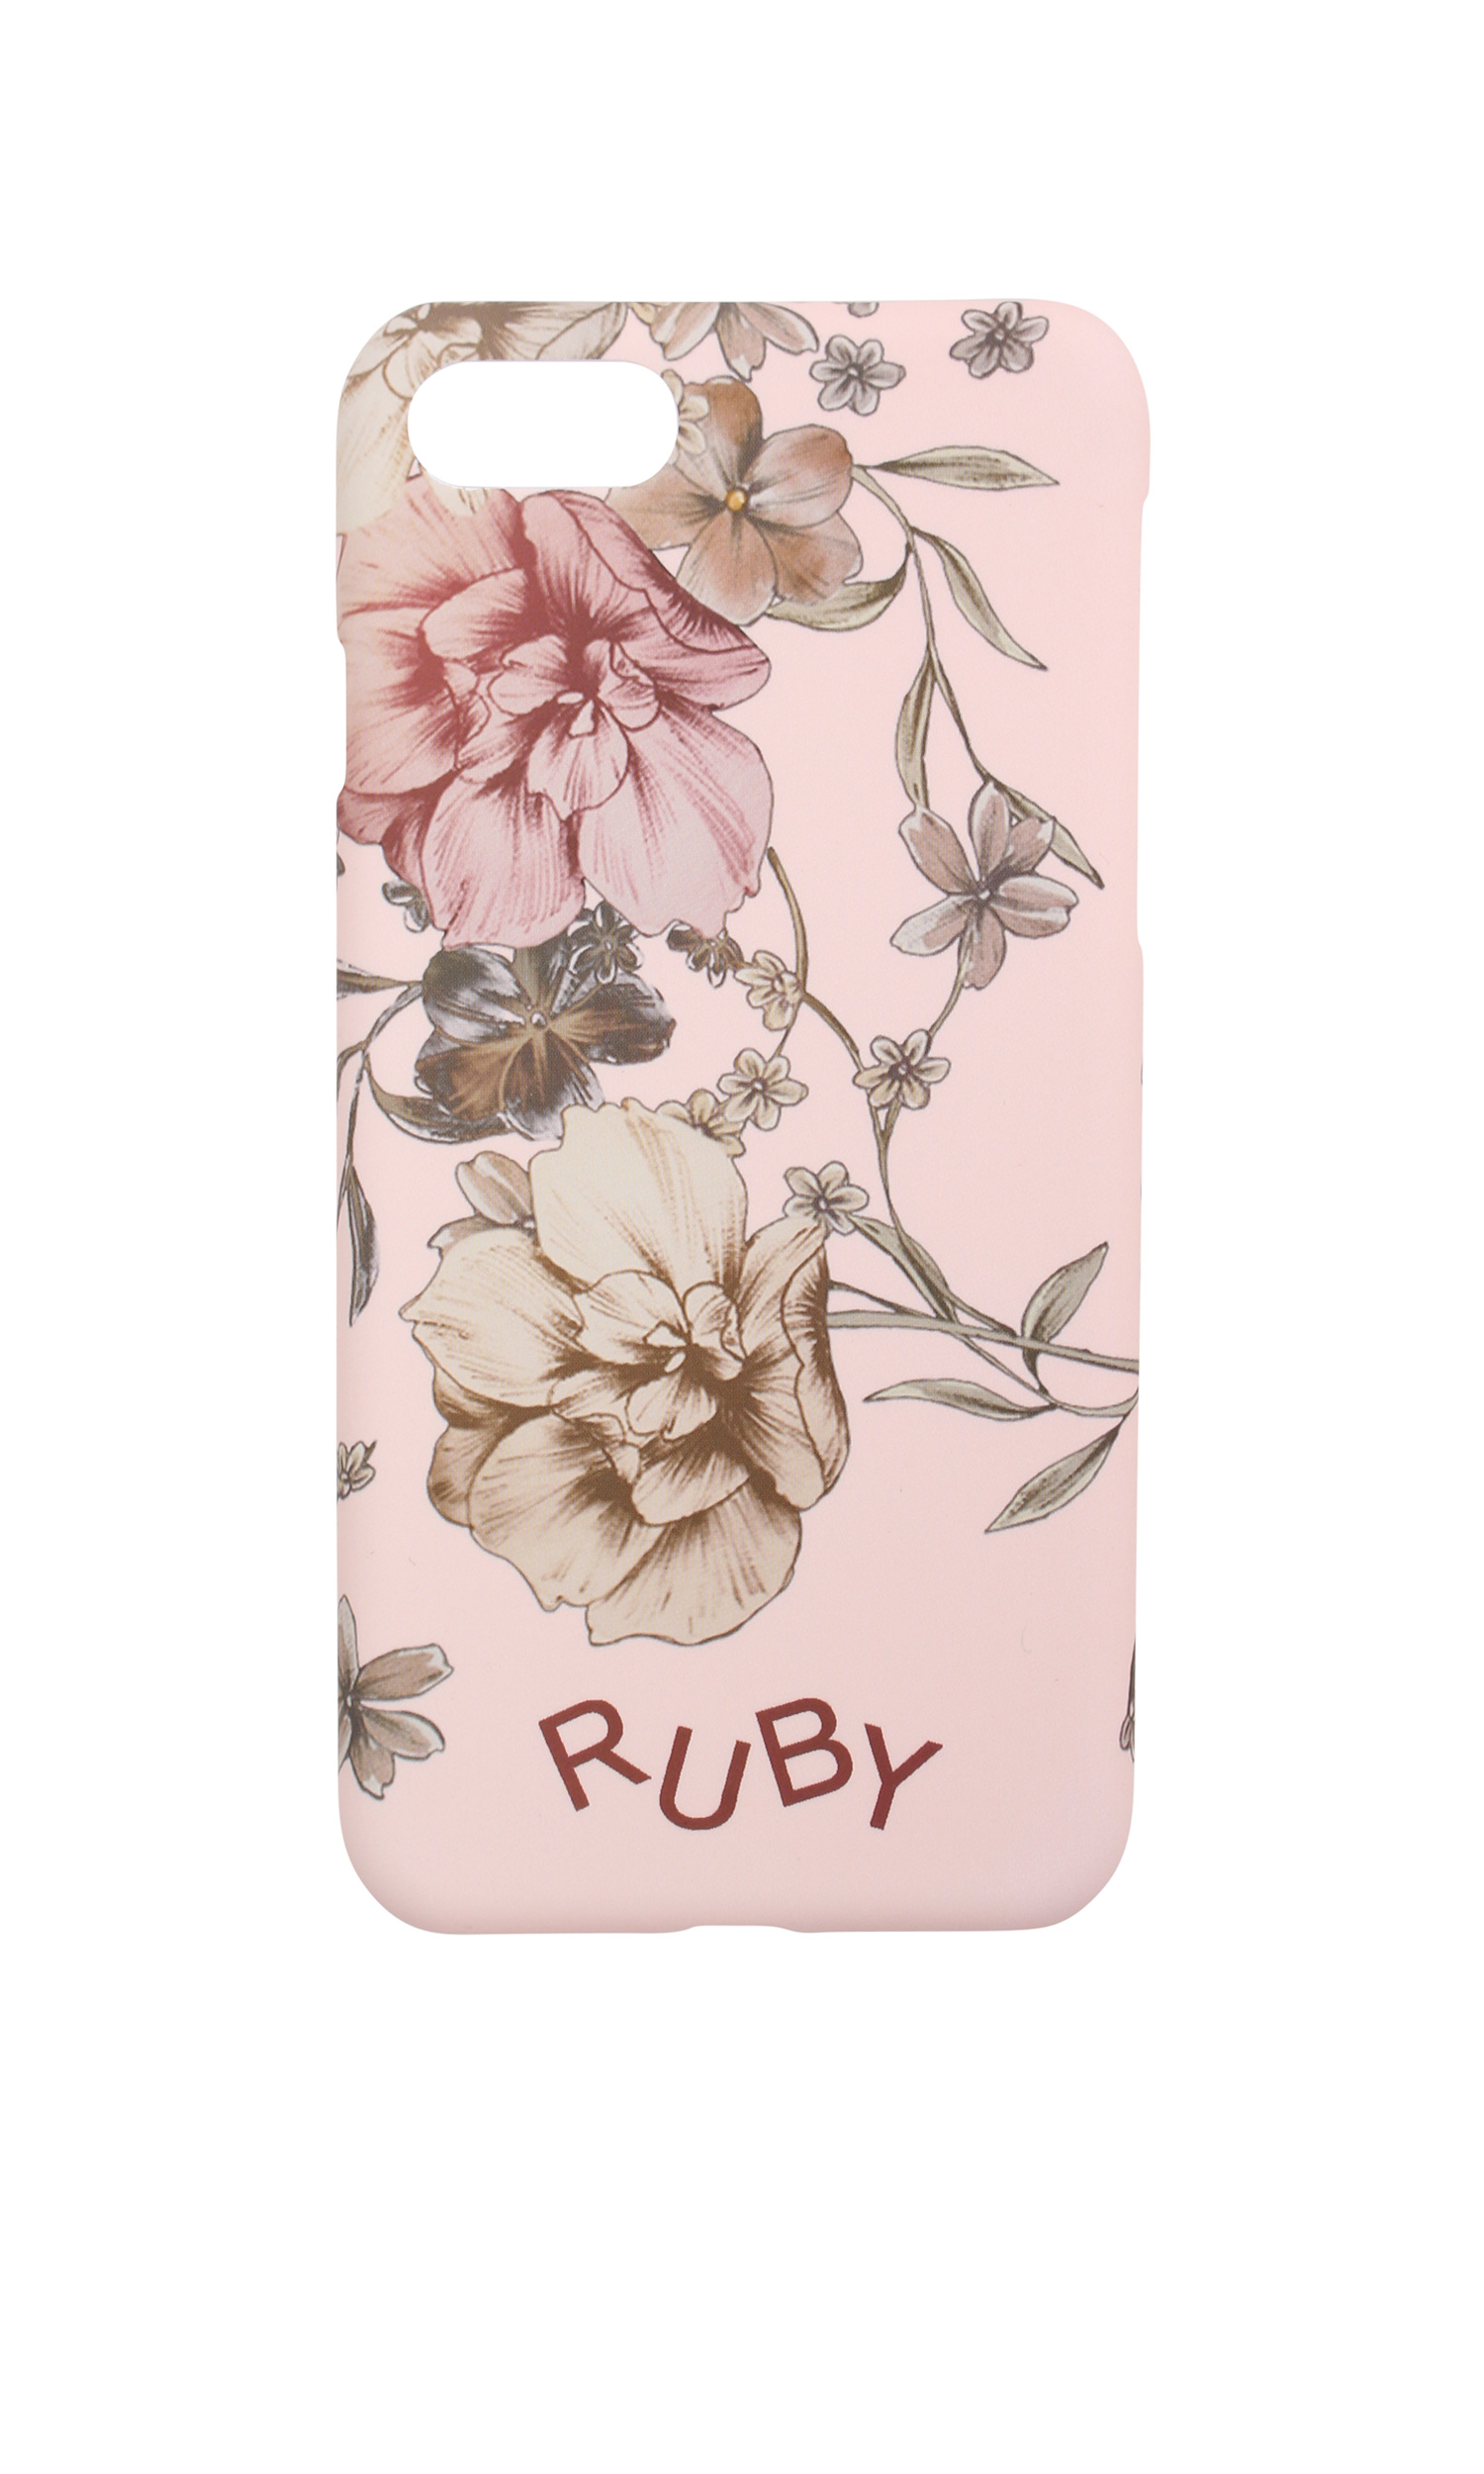 Bellevue iPhone 8 Case, $29 from RUBY